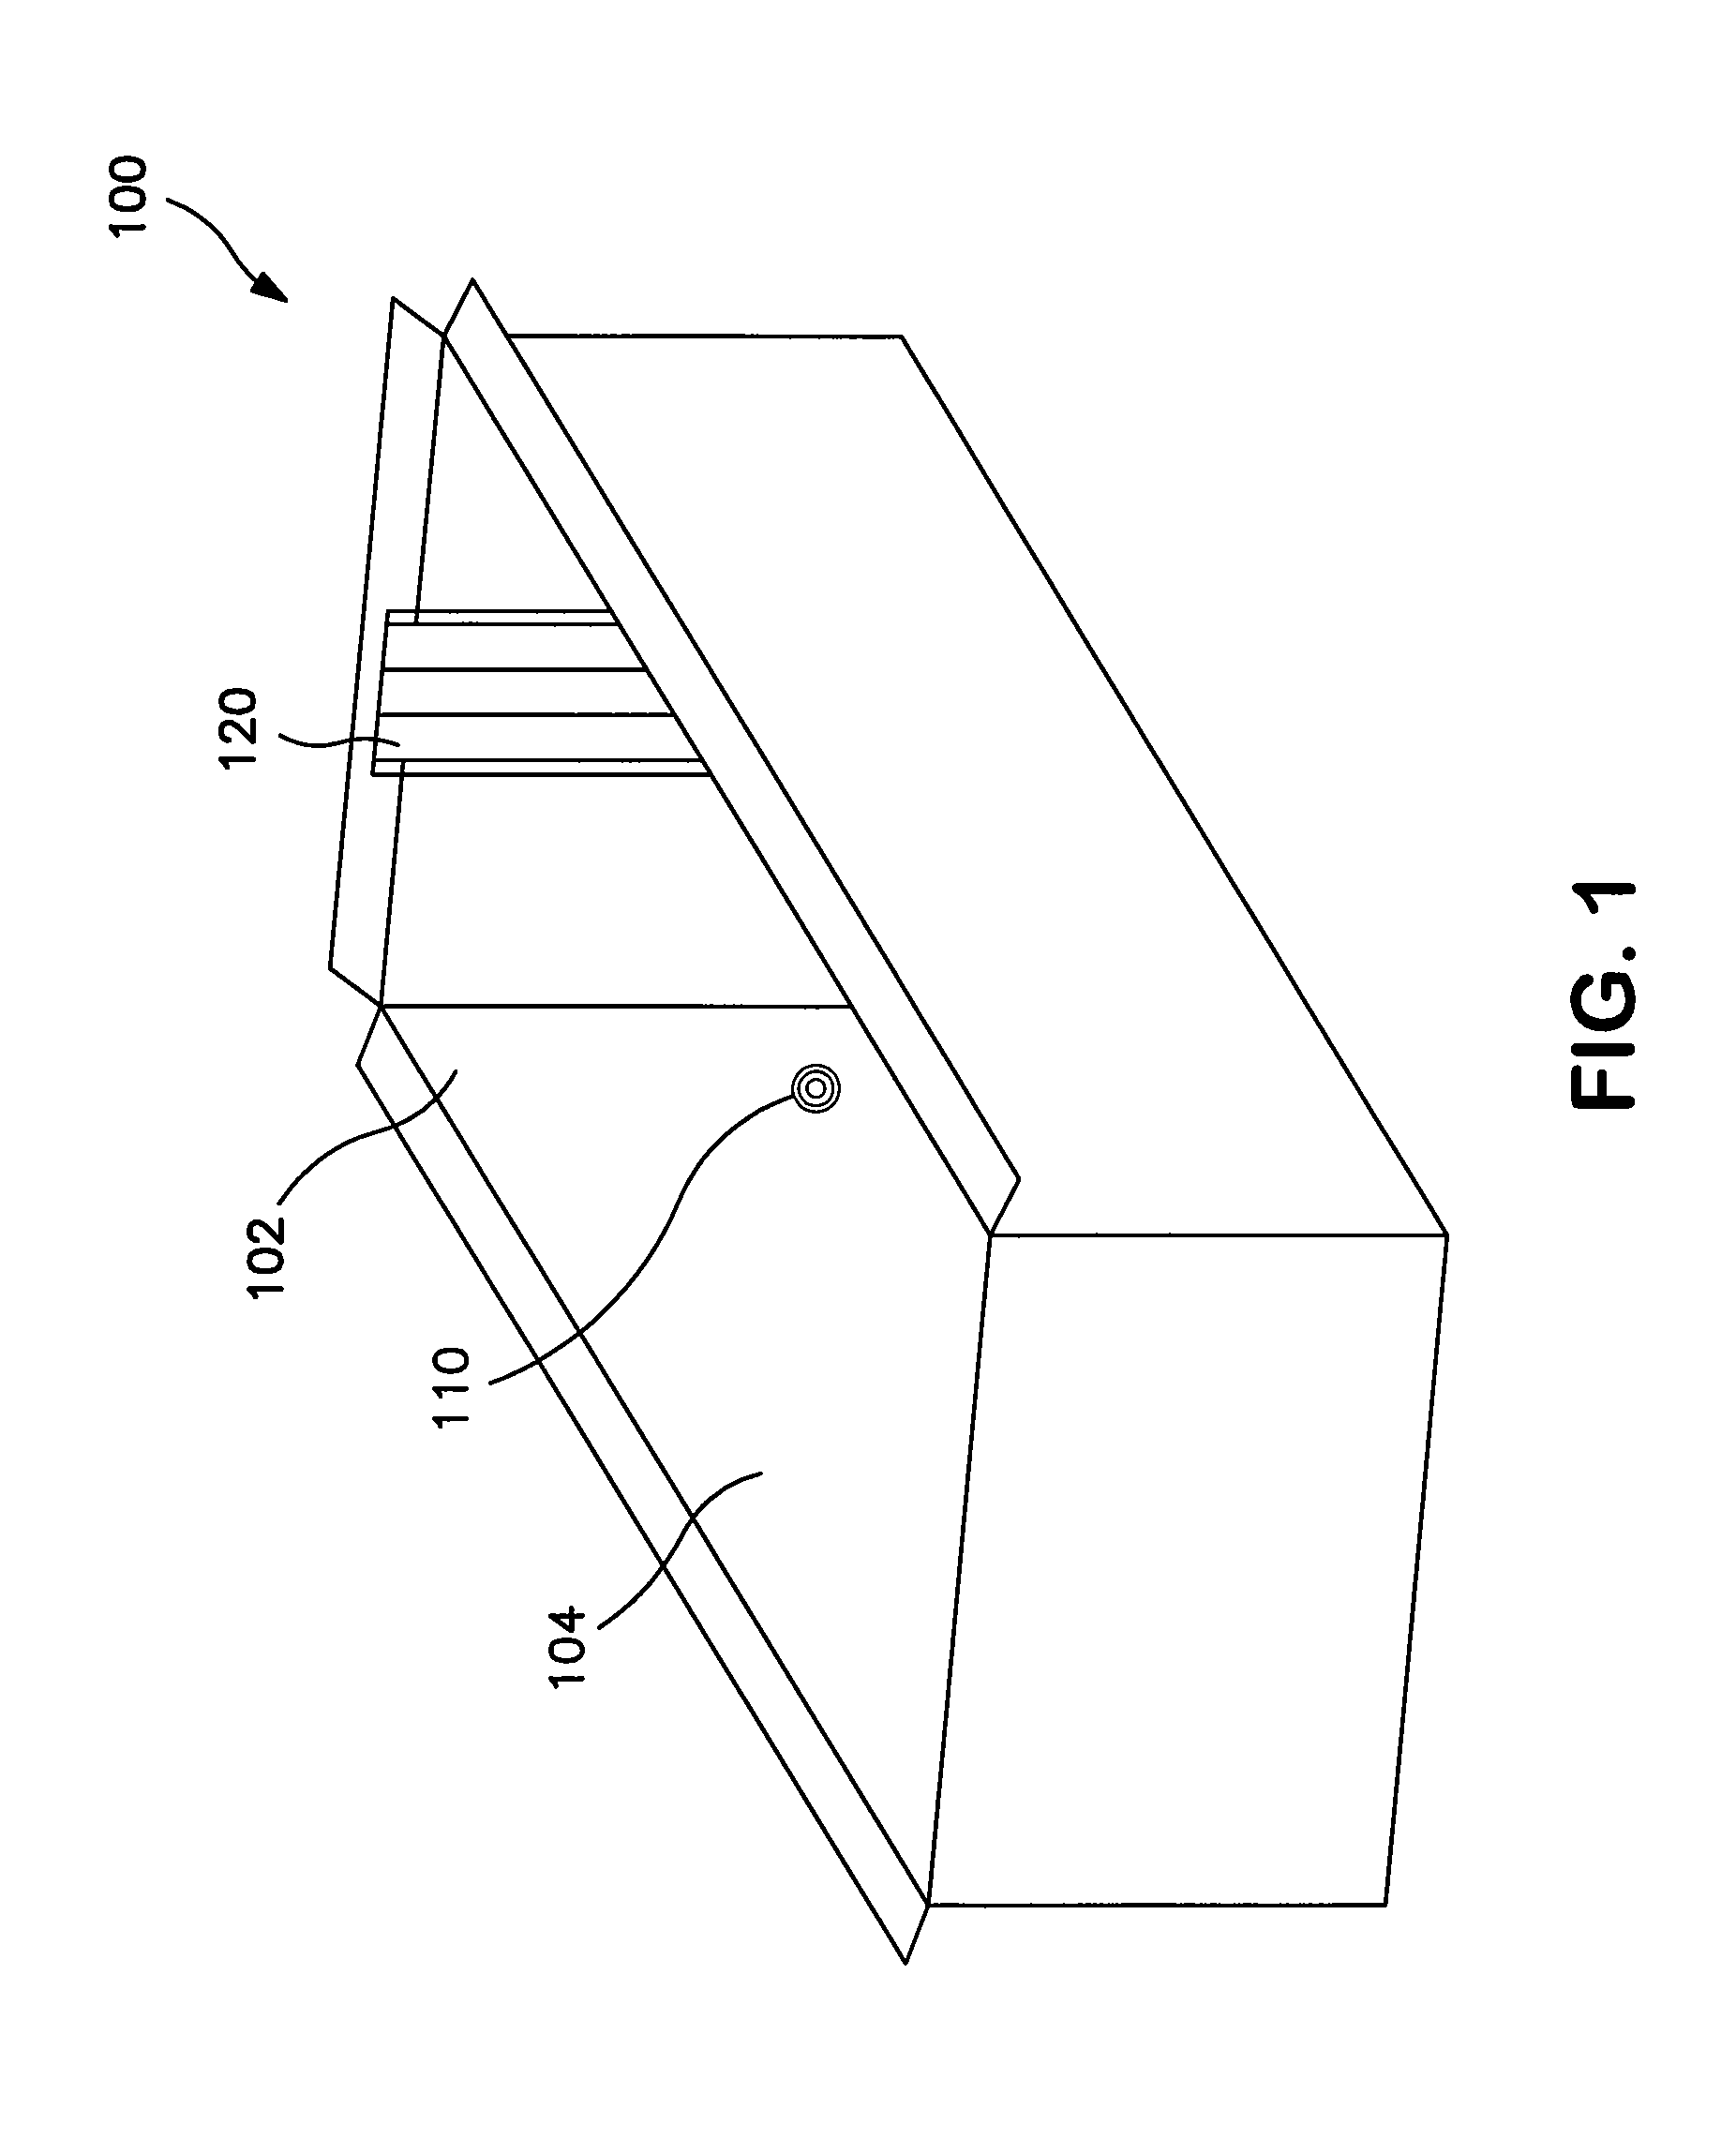 Automatic cooking medium level control systems and methods